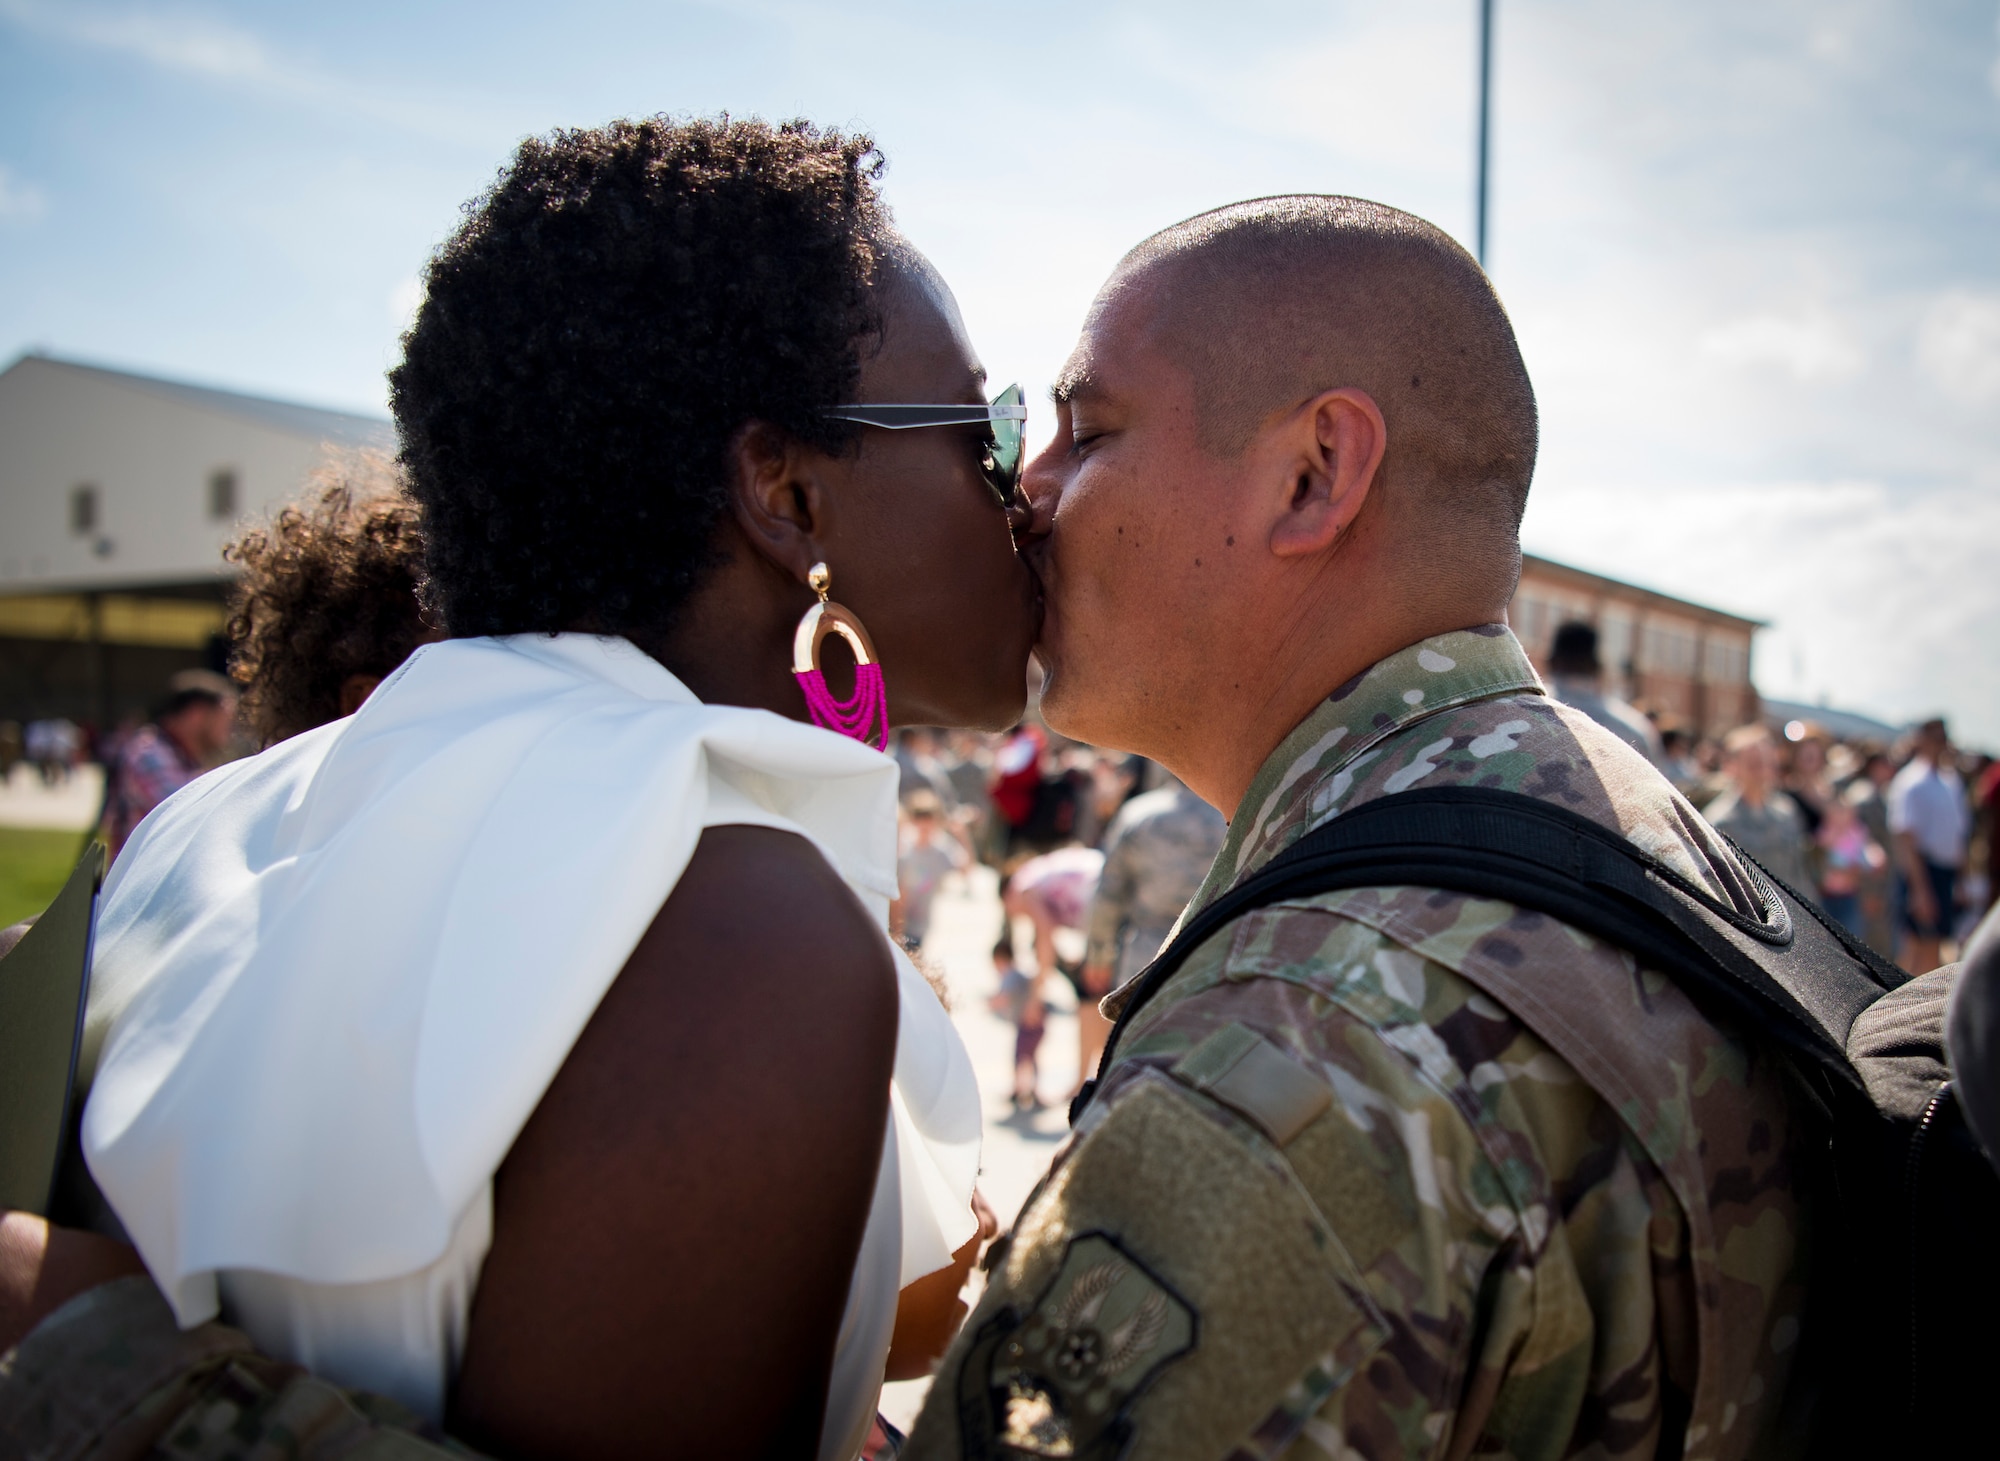 Right, U.S. Air Force Master Sgt. Victor Chavez, 1st Maintenance Squadron fabrication flight chief, is greeted by his wife Denise Chavez as he returns from deployment at Joint Base Langley-Eustis, Virginia, Oct. 9, 2018